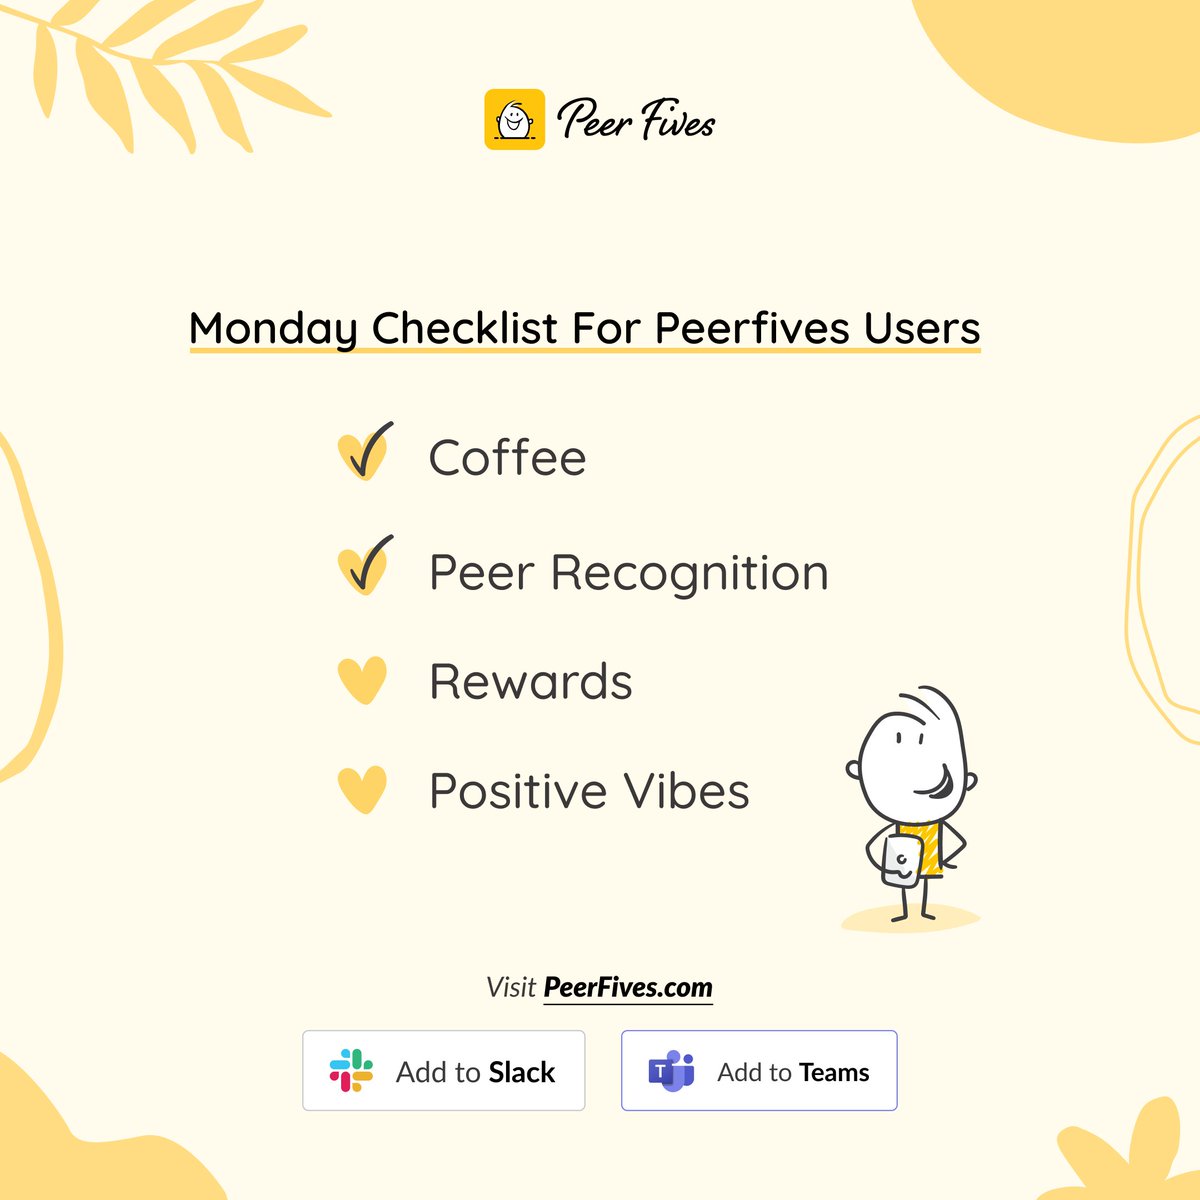 Tick all the boxes and make Monday extra special for everyone around! Join the peer recognition revolution with PeerFives NOW!

Visit Now: Peerfives.com

#reward #mondaymood #work #teamcollaboration #peertopeersupport #rewardsandrecognition #employeerewards